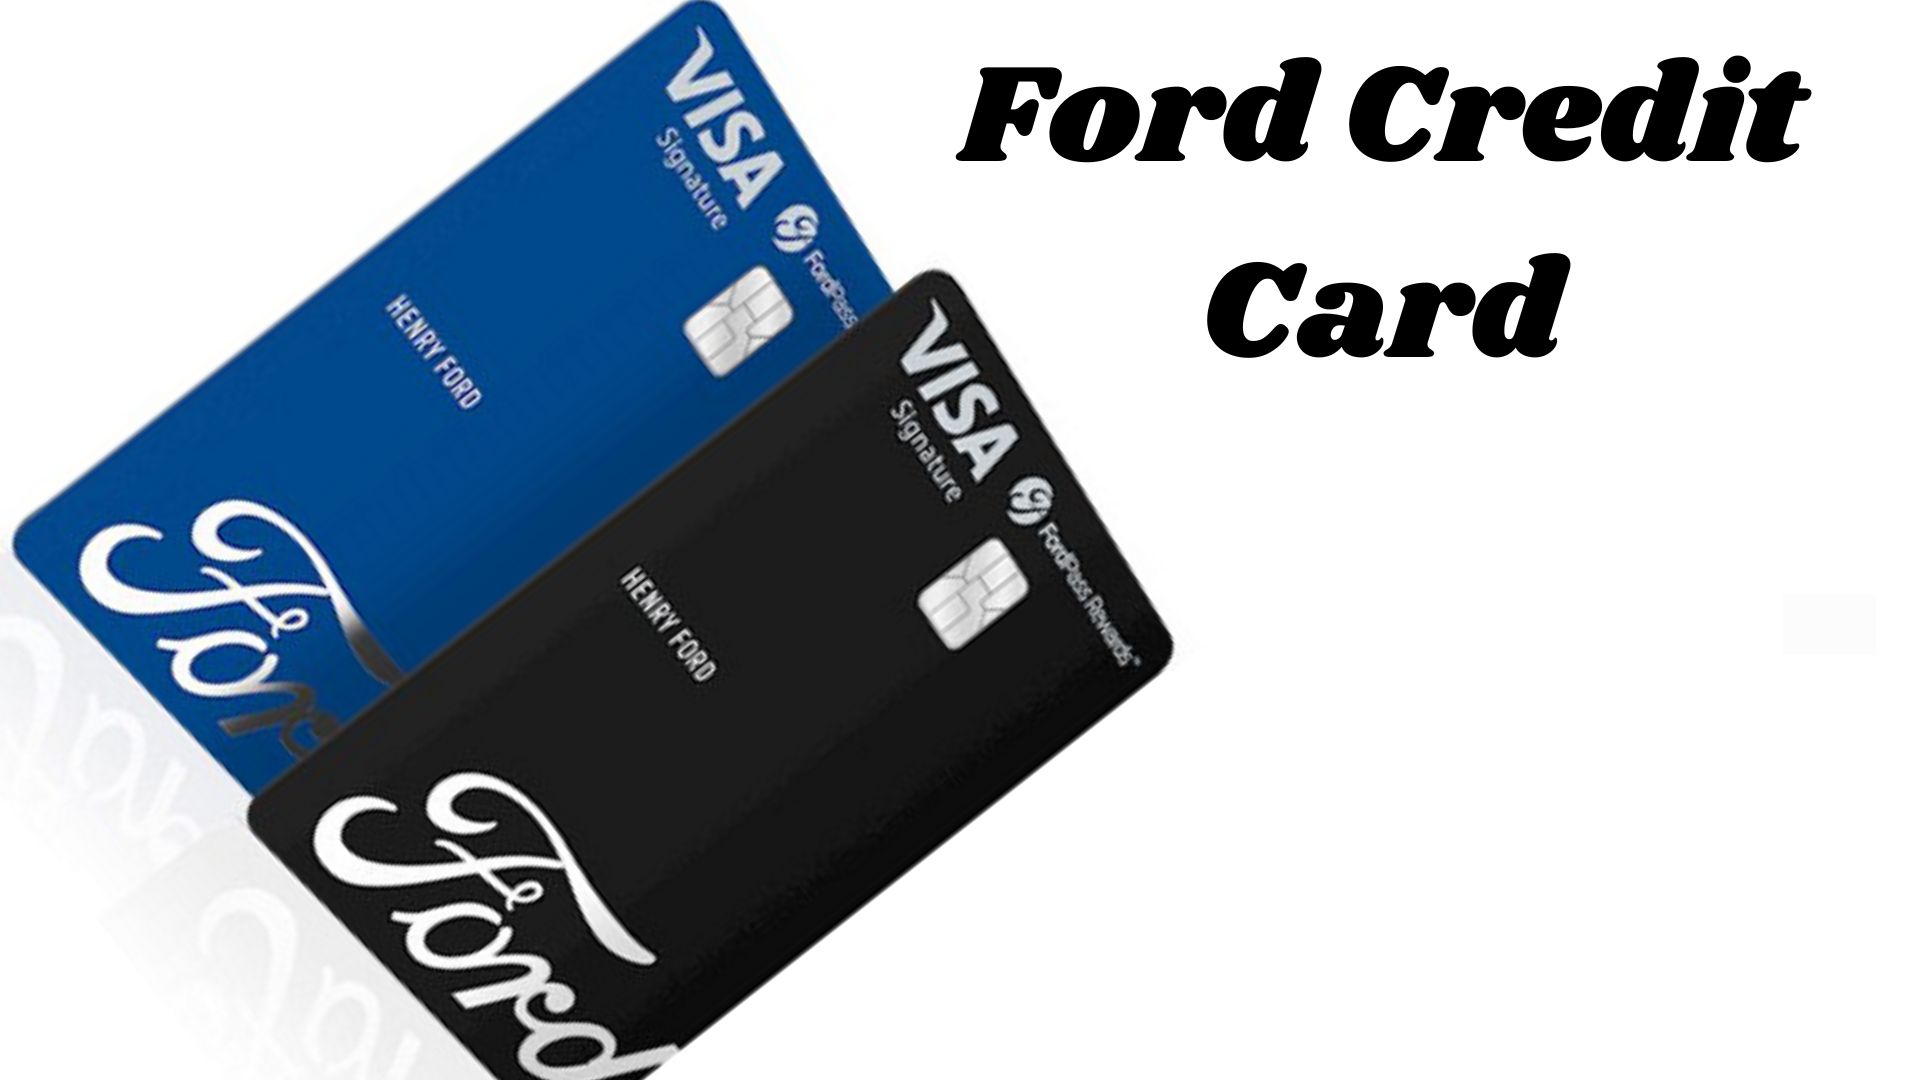 Introducing the Ford credit card